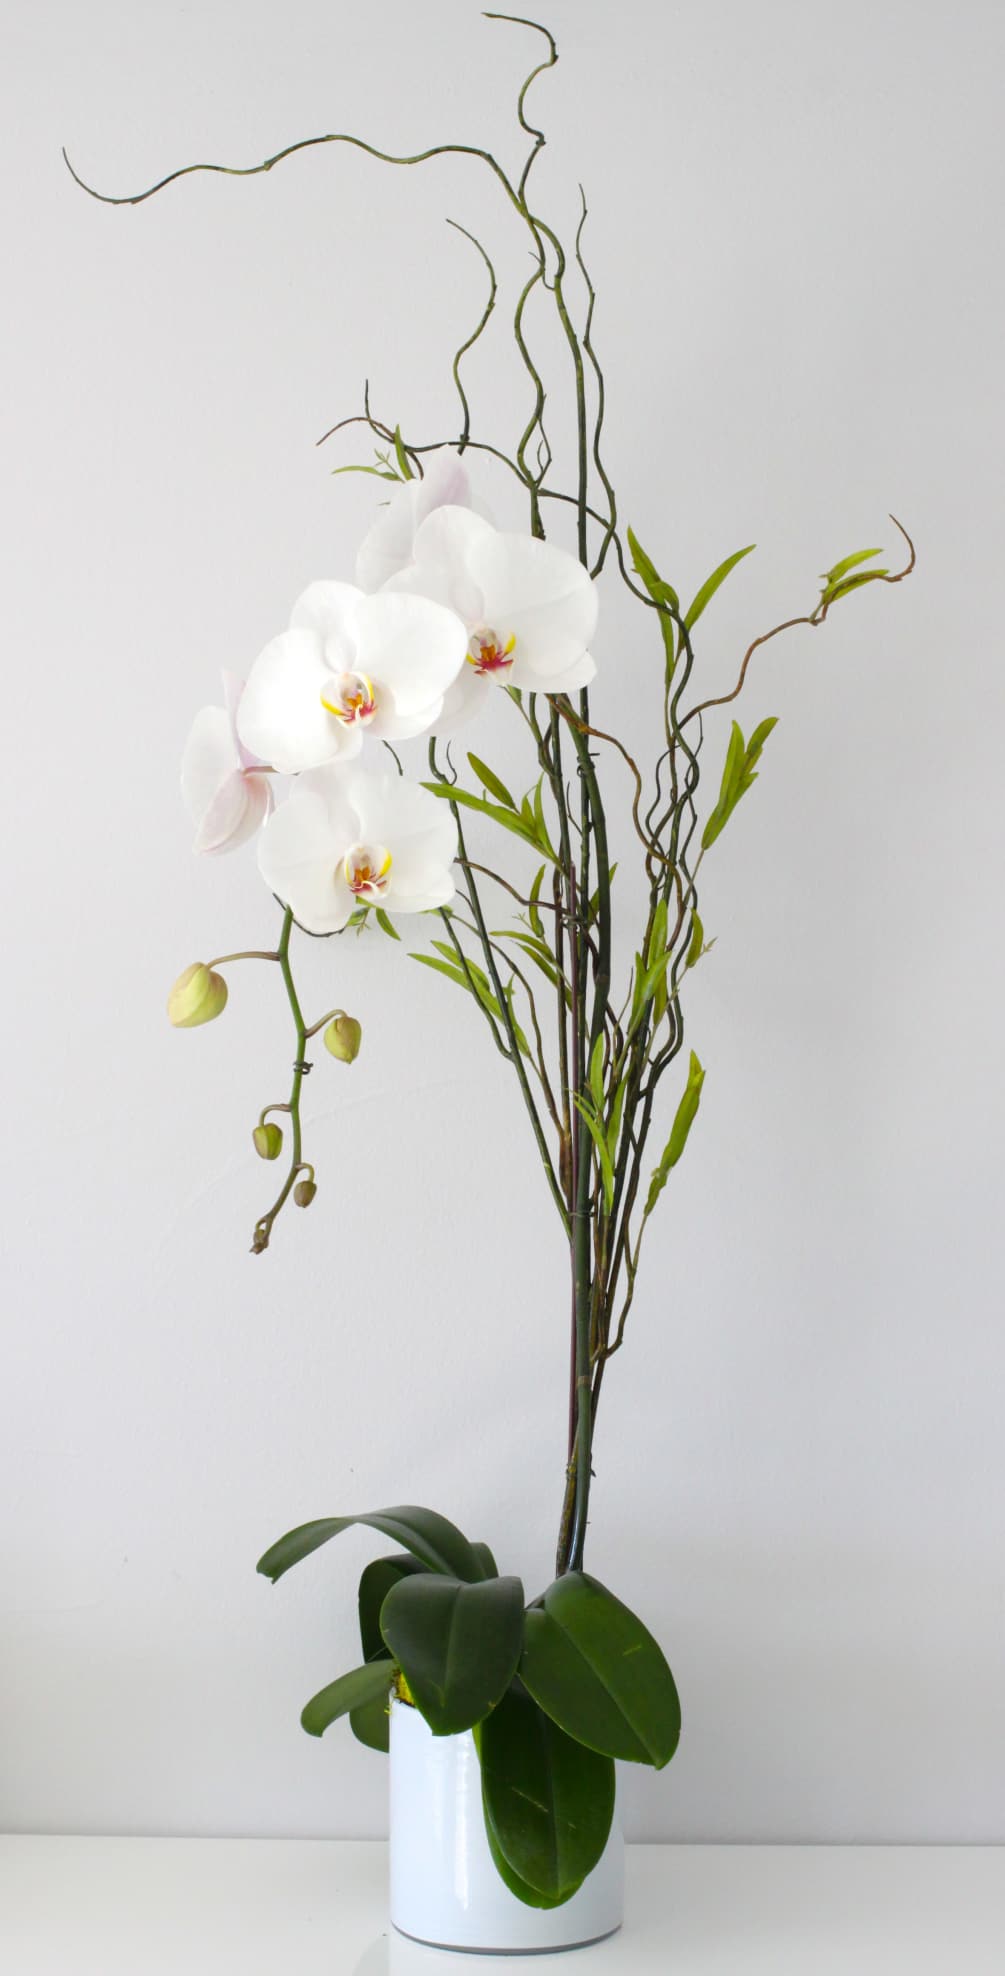 A graceful white Orchid plant in a moss-filled glass container from La